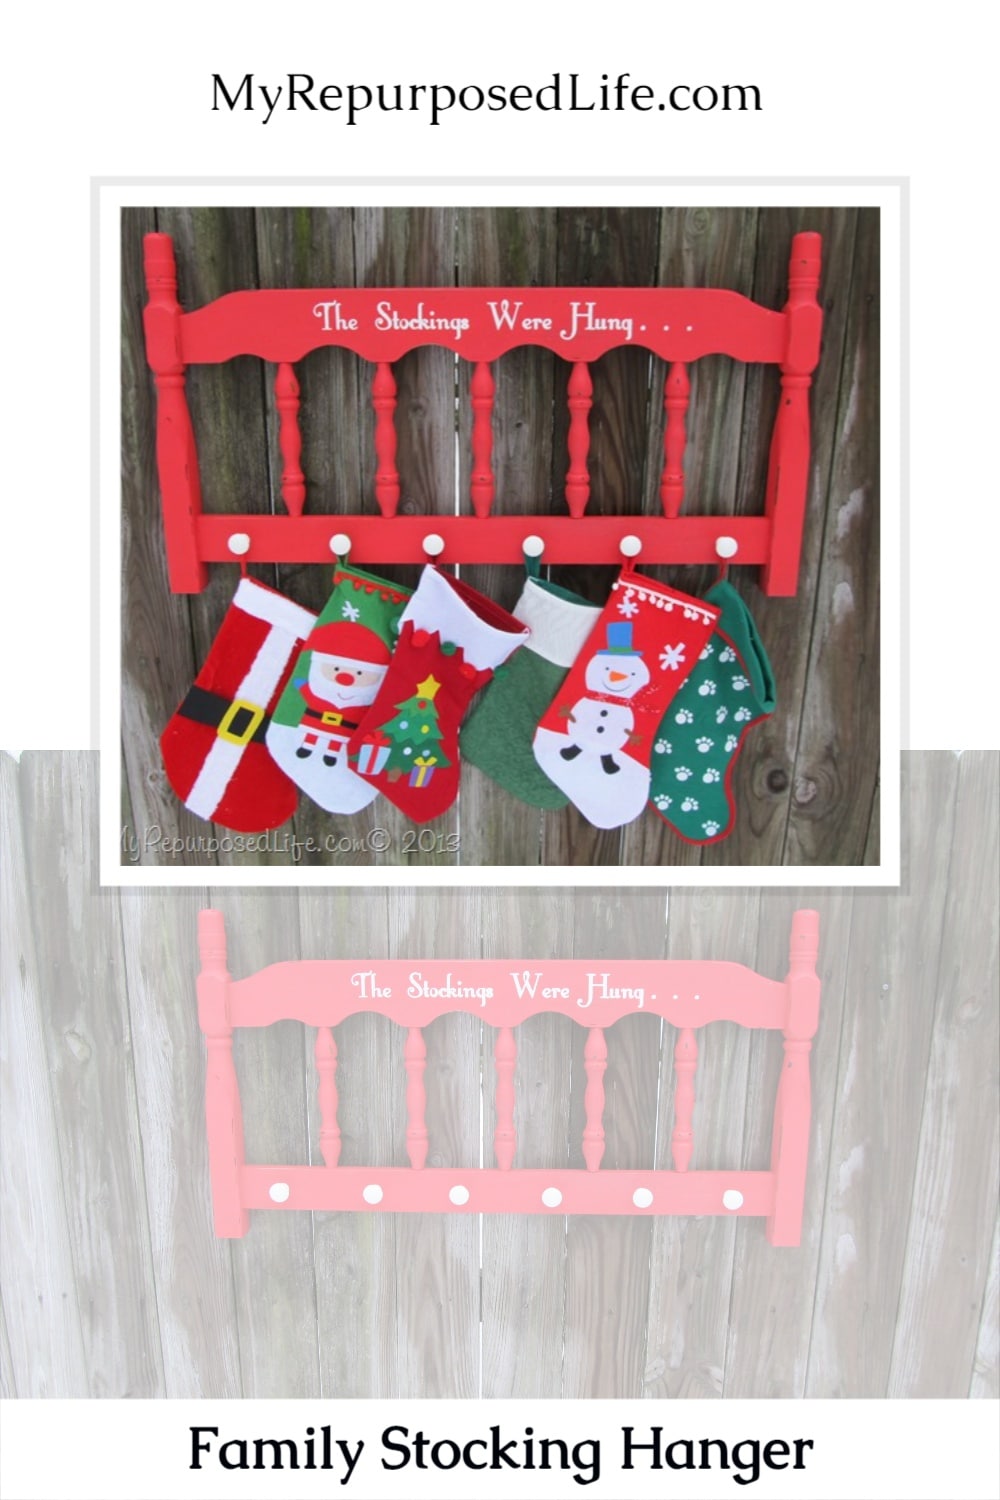 Easy DIY headboard project. Turn an old headboard into a Christmas Stocking holder for the whole family! Step by step directions. Pin this for later so you won't forget. #MyRepurposedLife #Repurposed #furniture #diy #Christmas #stockings #kids #family #home #decor via @repurposedlife